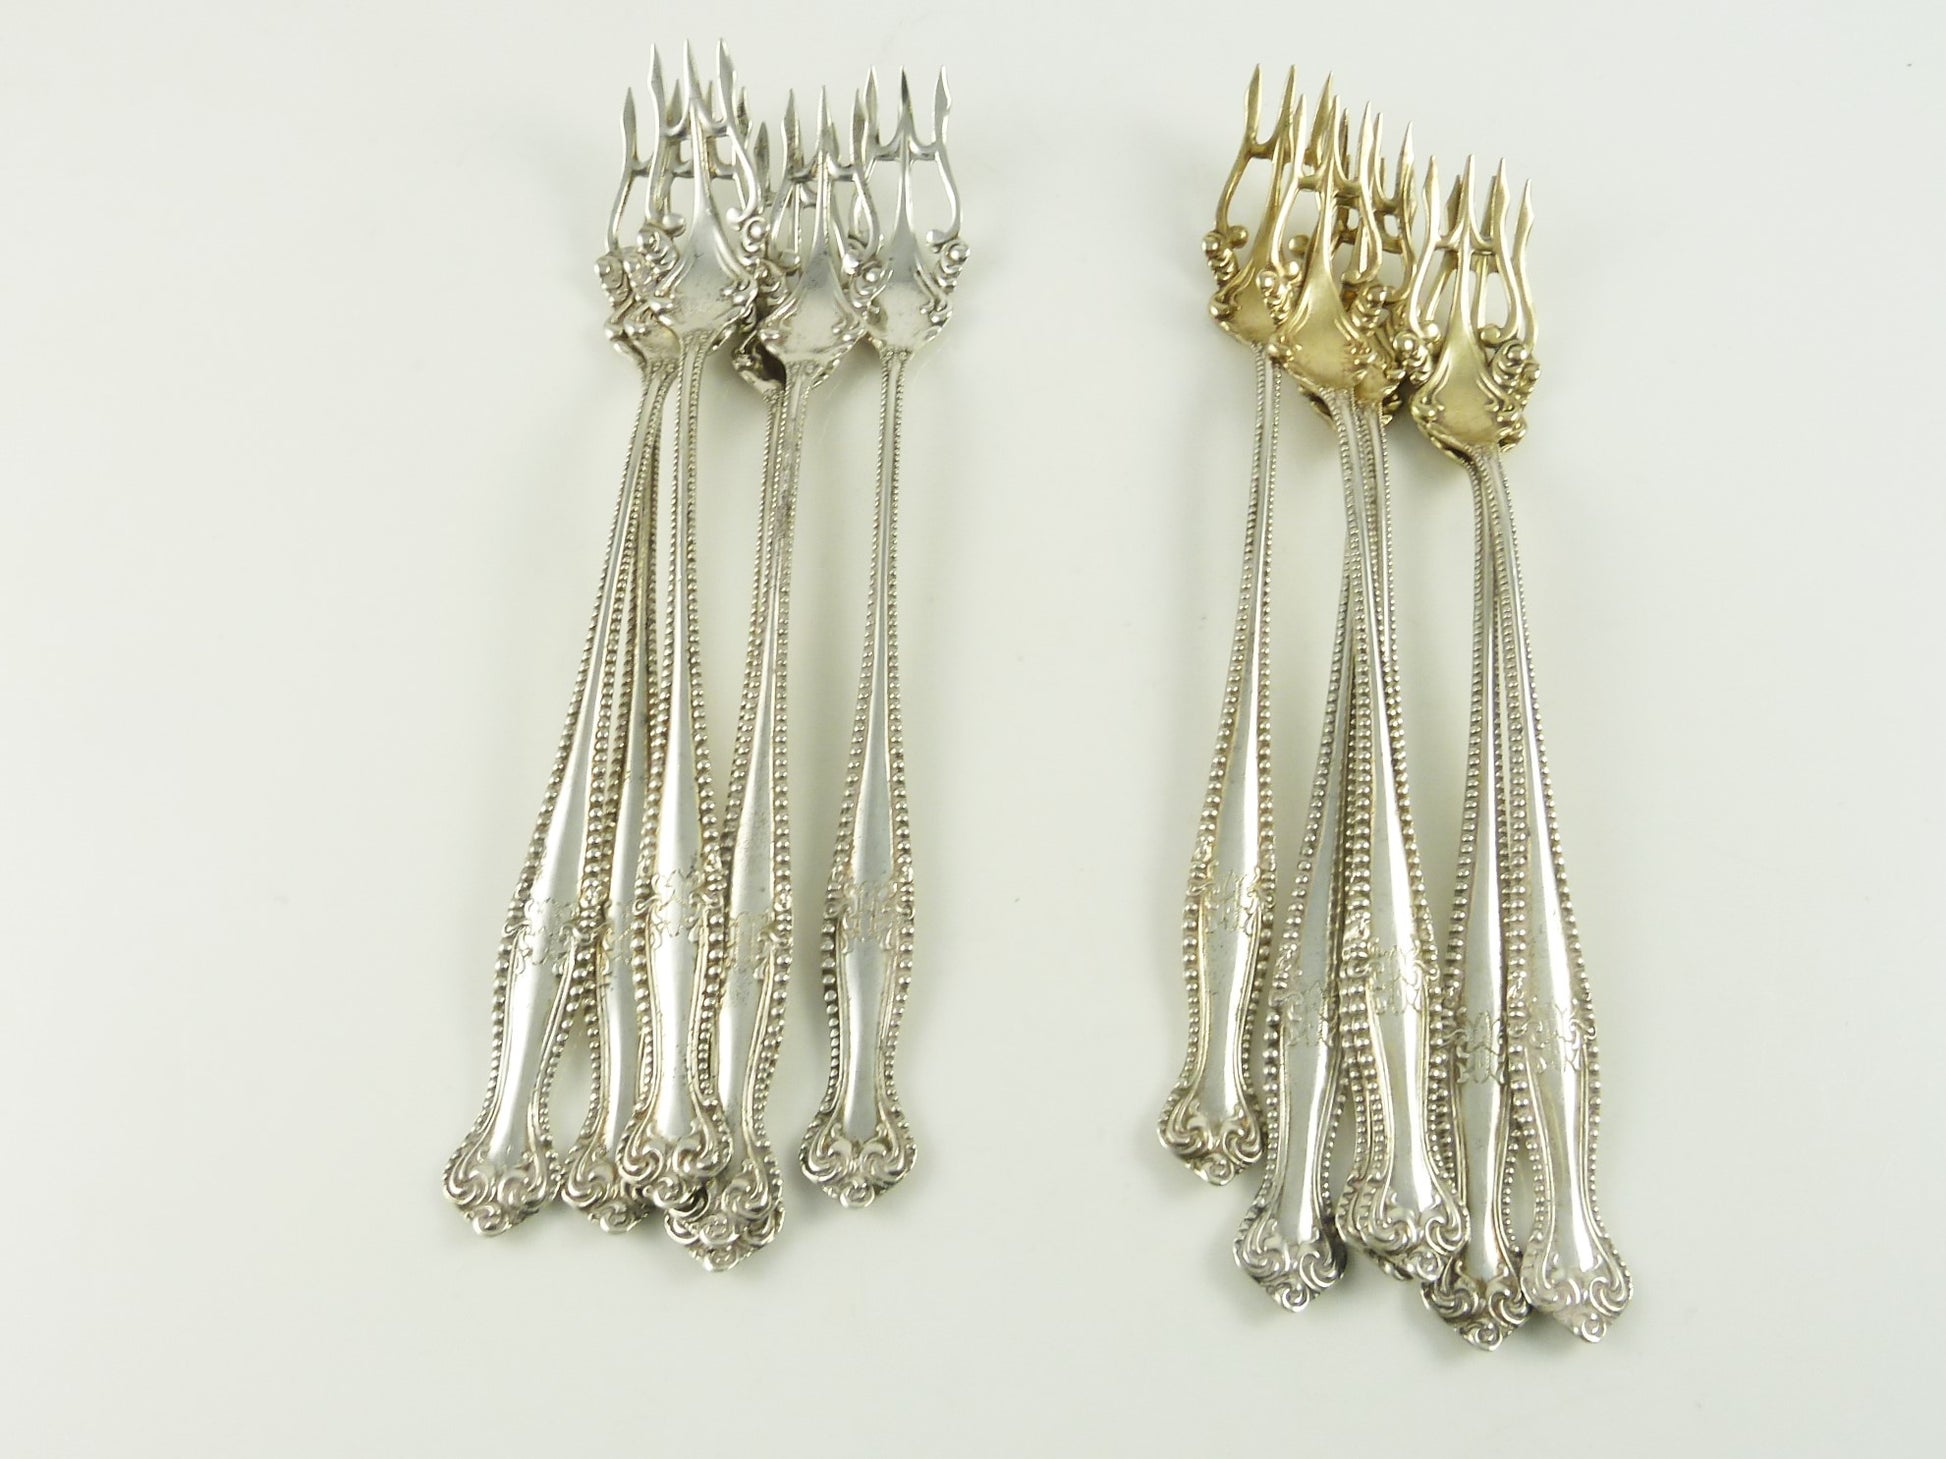 Sterling Silver Set of Six Oyster or Cocktail Forks, Ornate Tines with Gilt - 43 Chesapeake Court Antiques